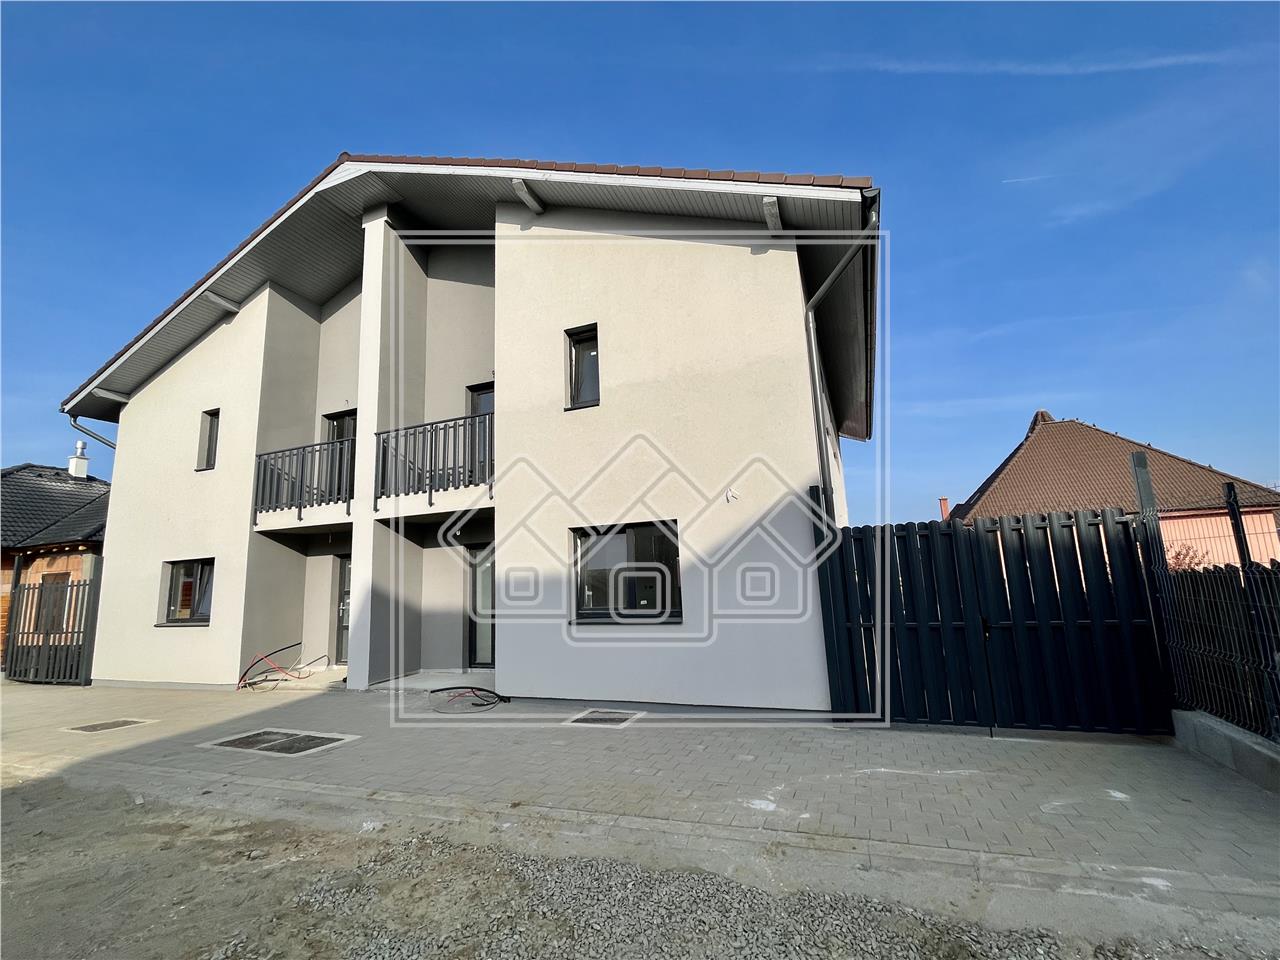 House for sale in Sibiu - duplex - 4 rooms - 2 parking spaces